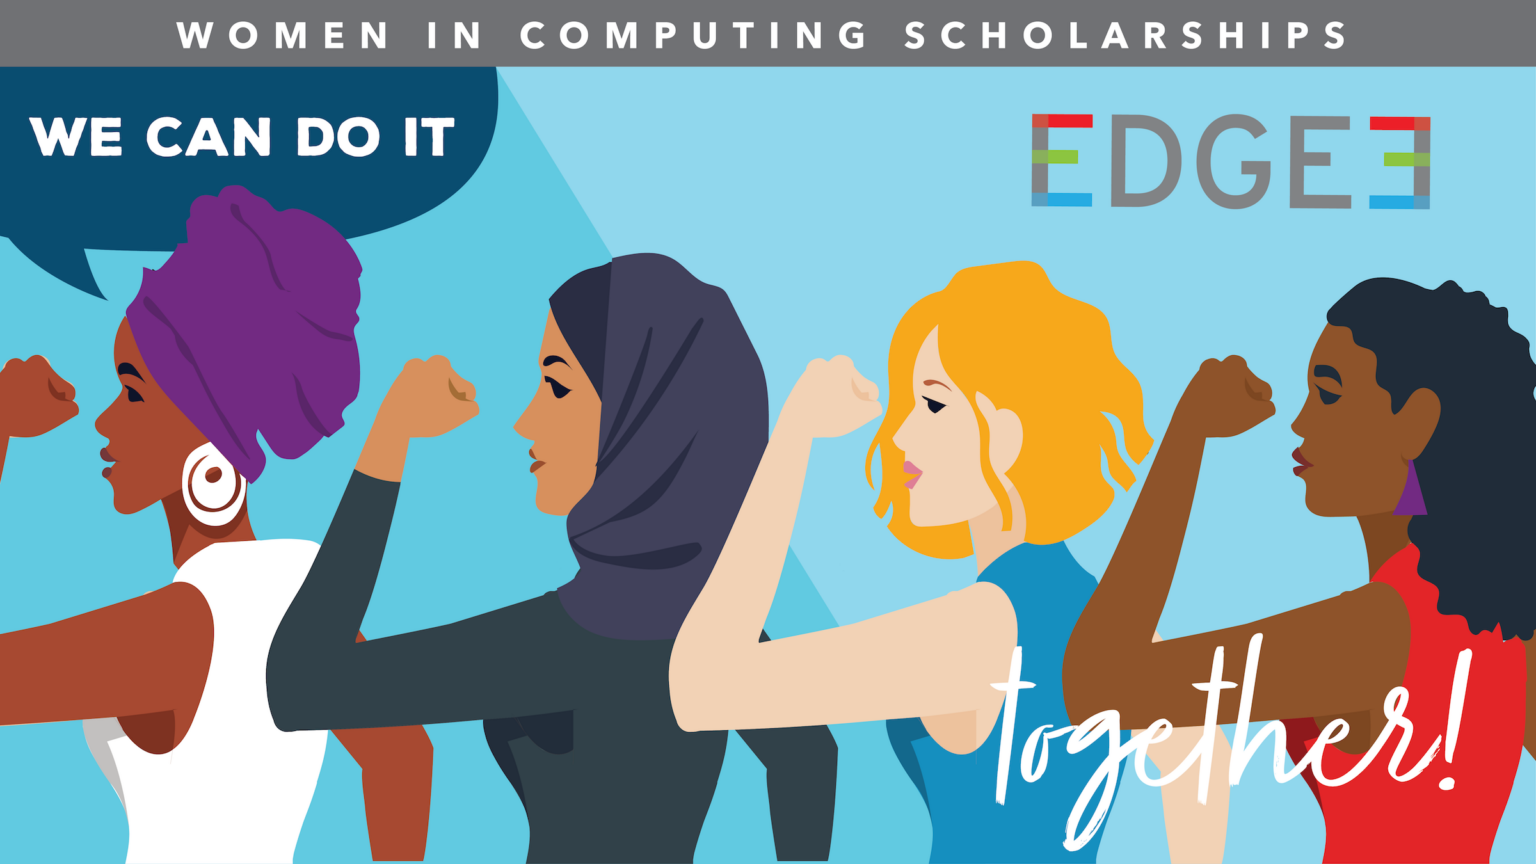 stylized graphic of four women of various ethnic backgrounds standing togther with fists raised, promoting the EDGE3 scholarhips